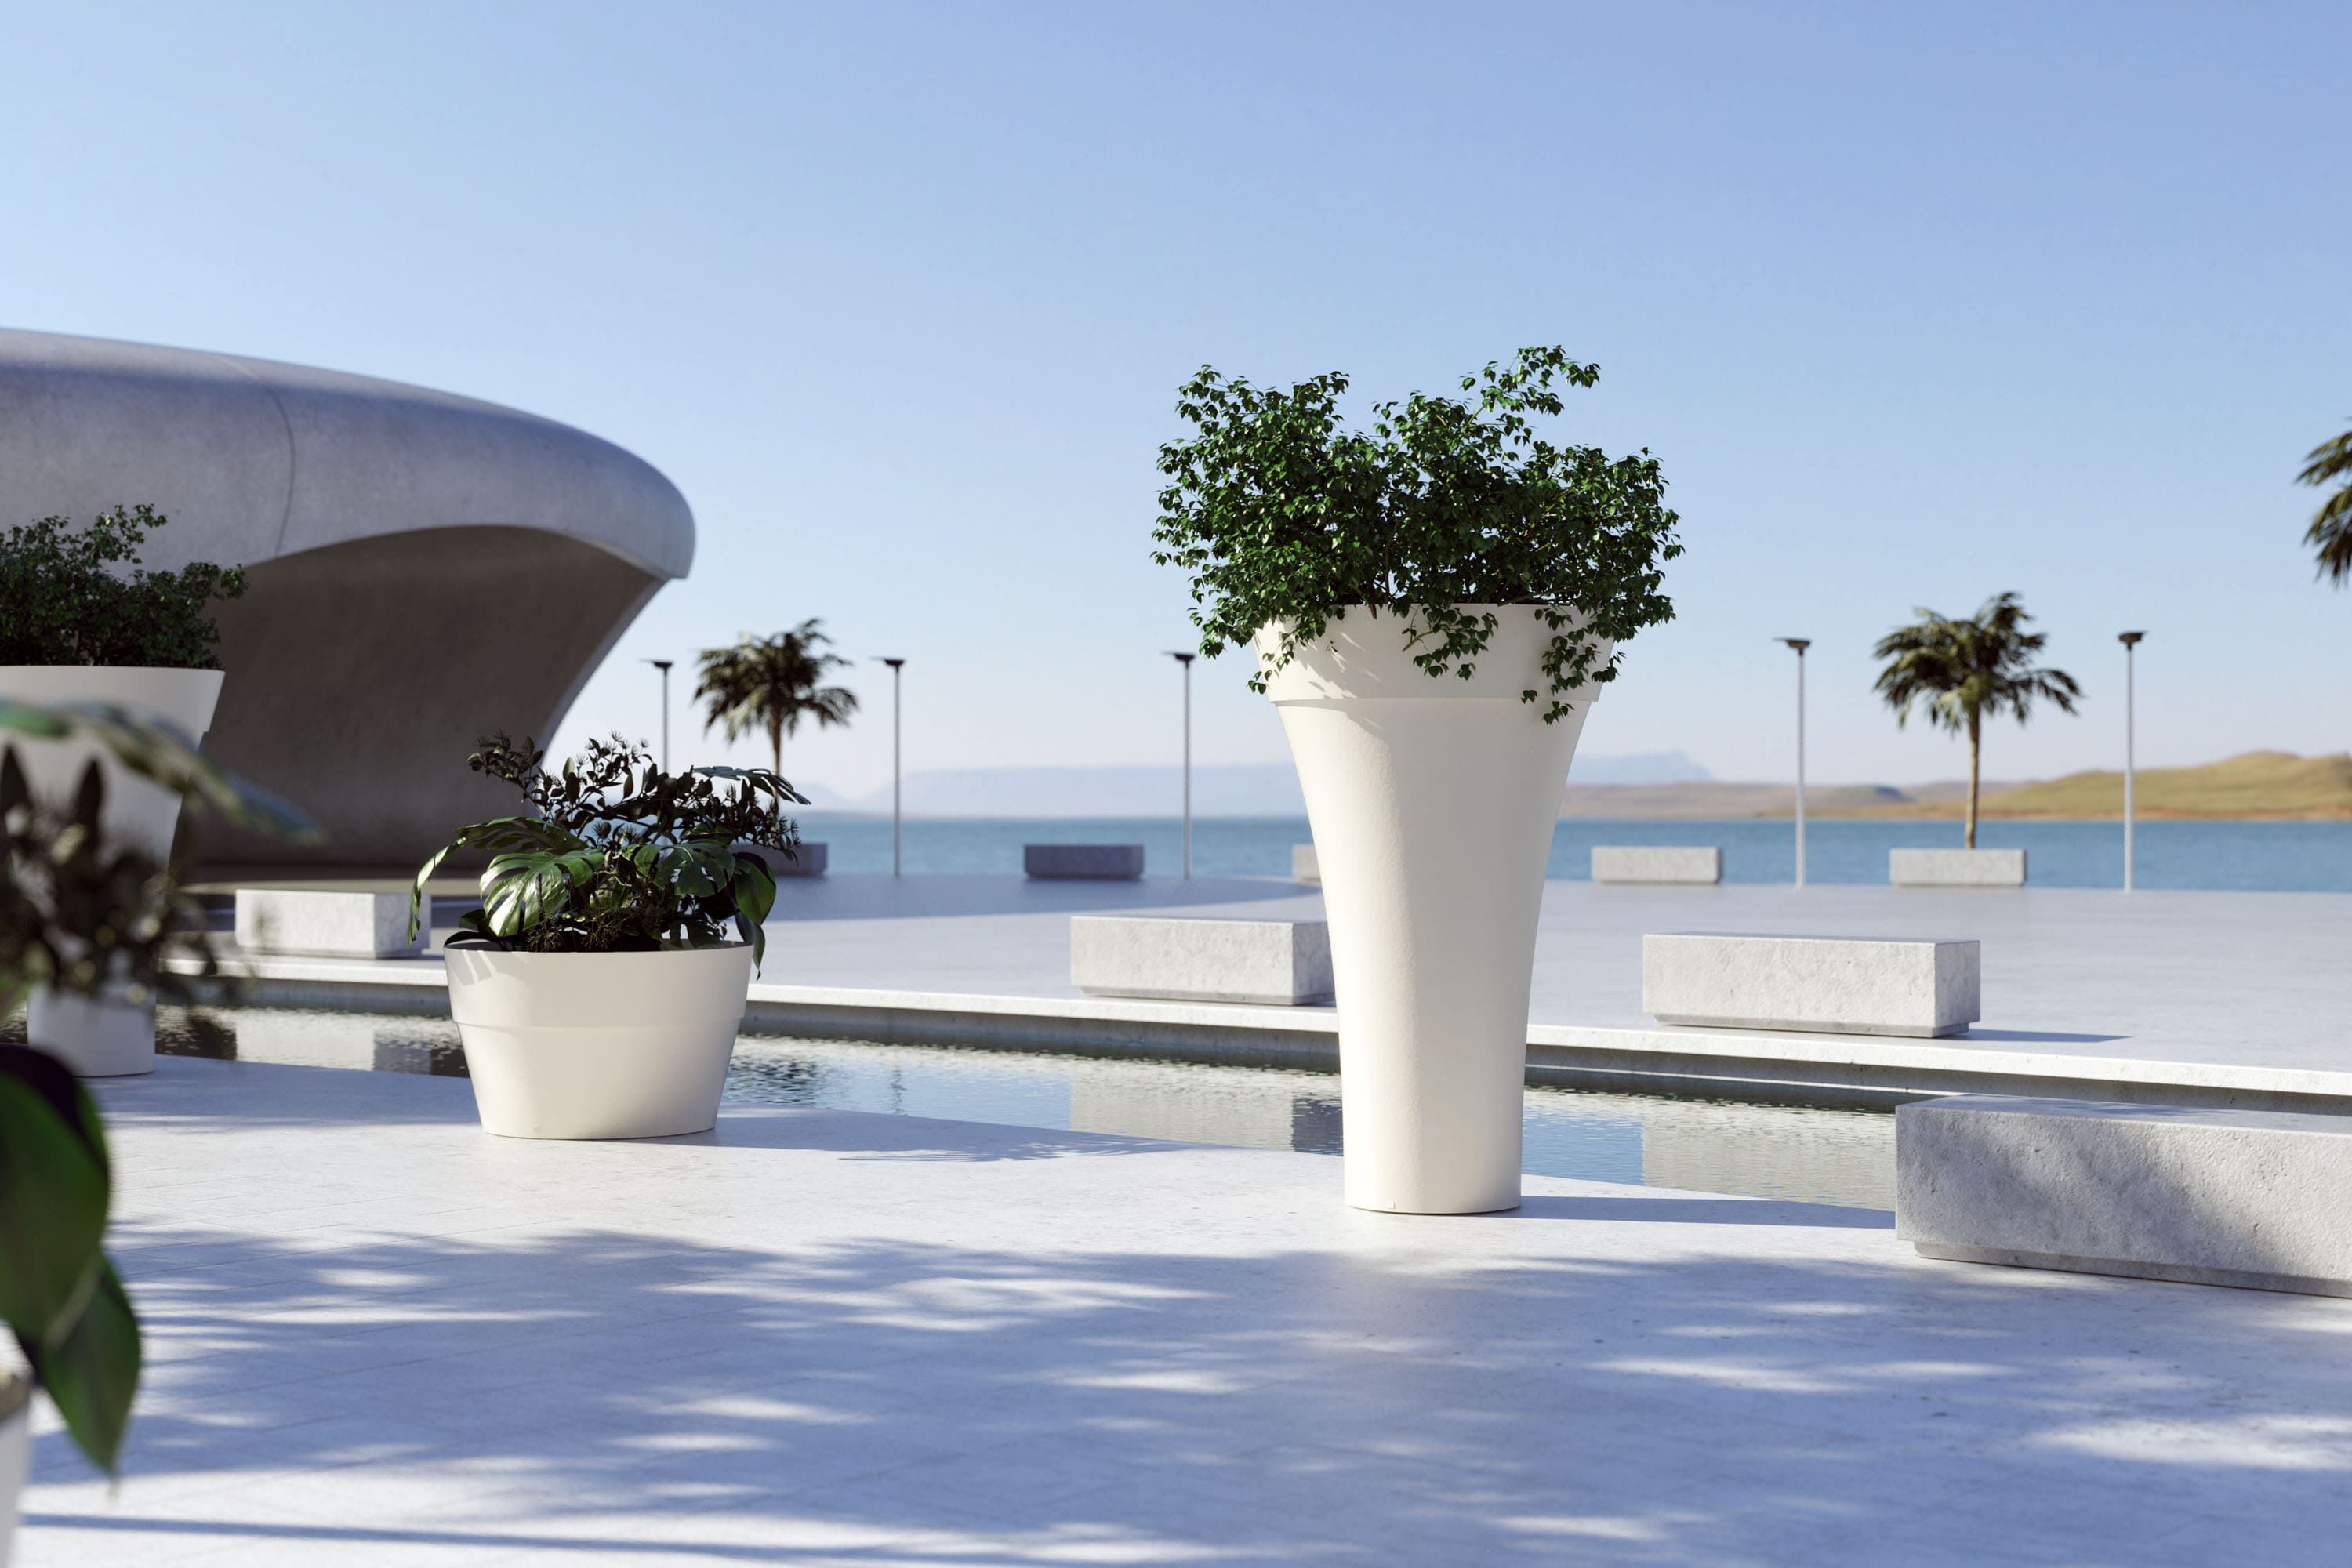 City decoration environment with giant planters Maximo